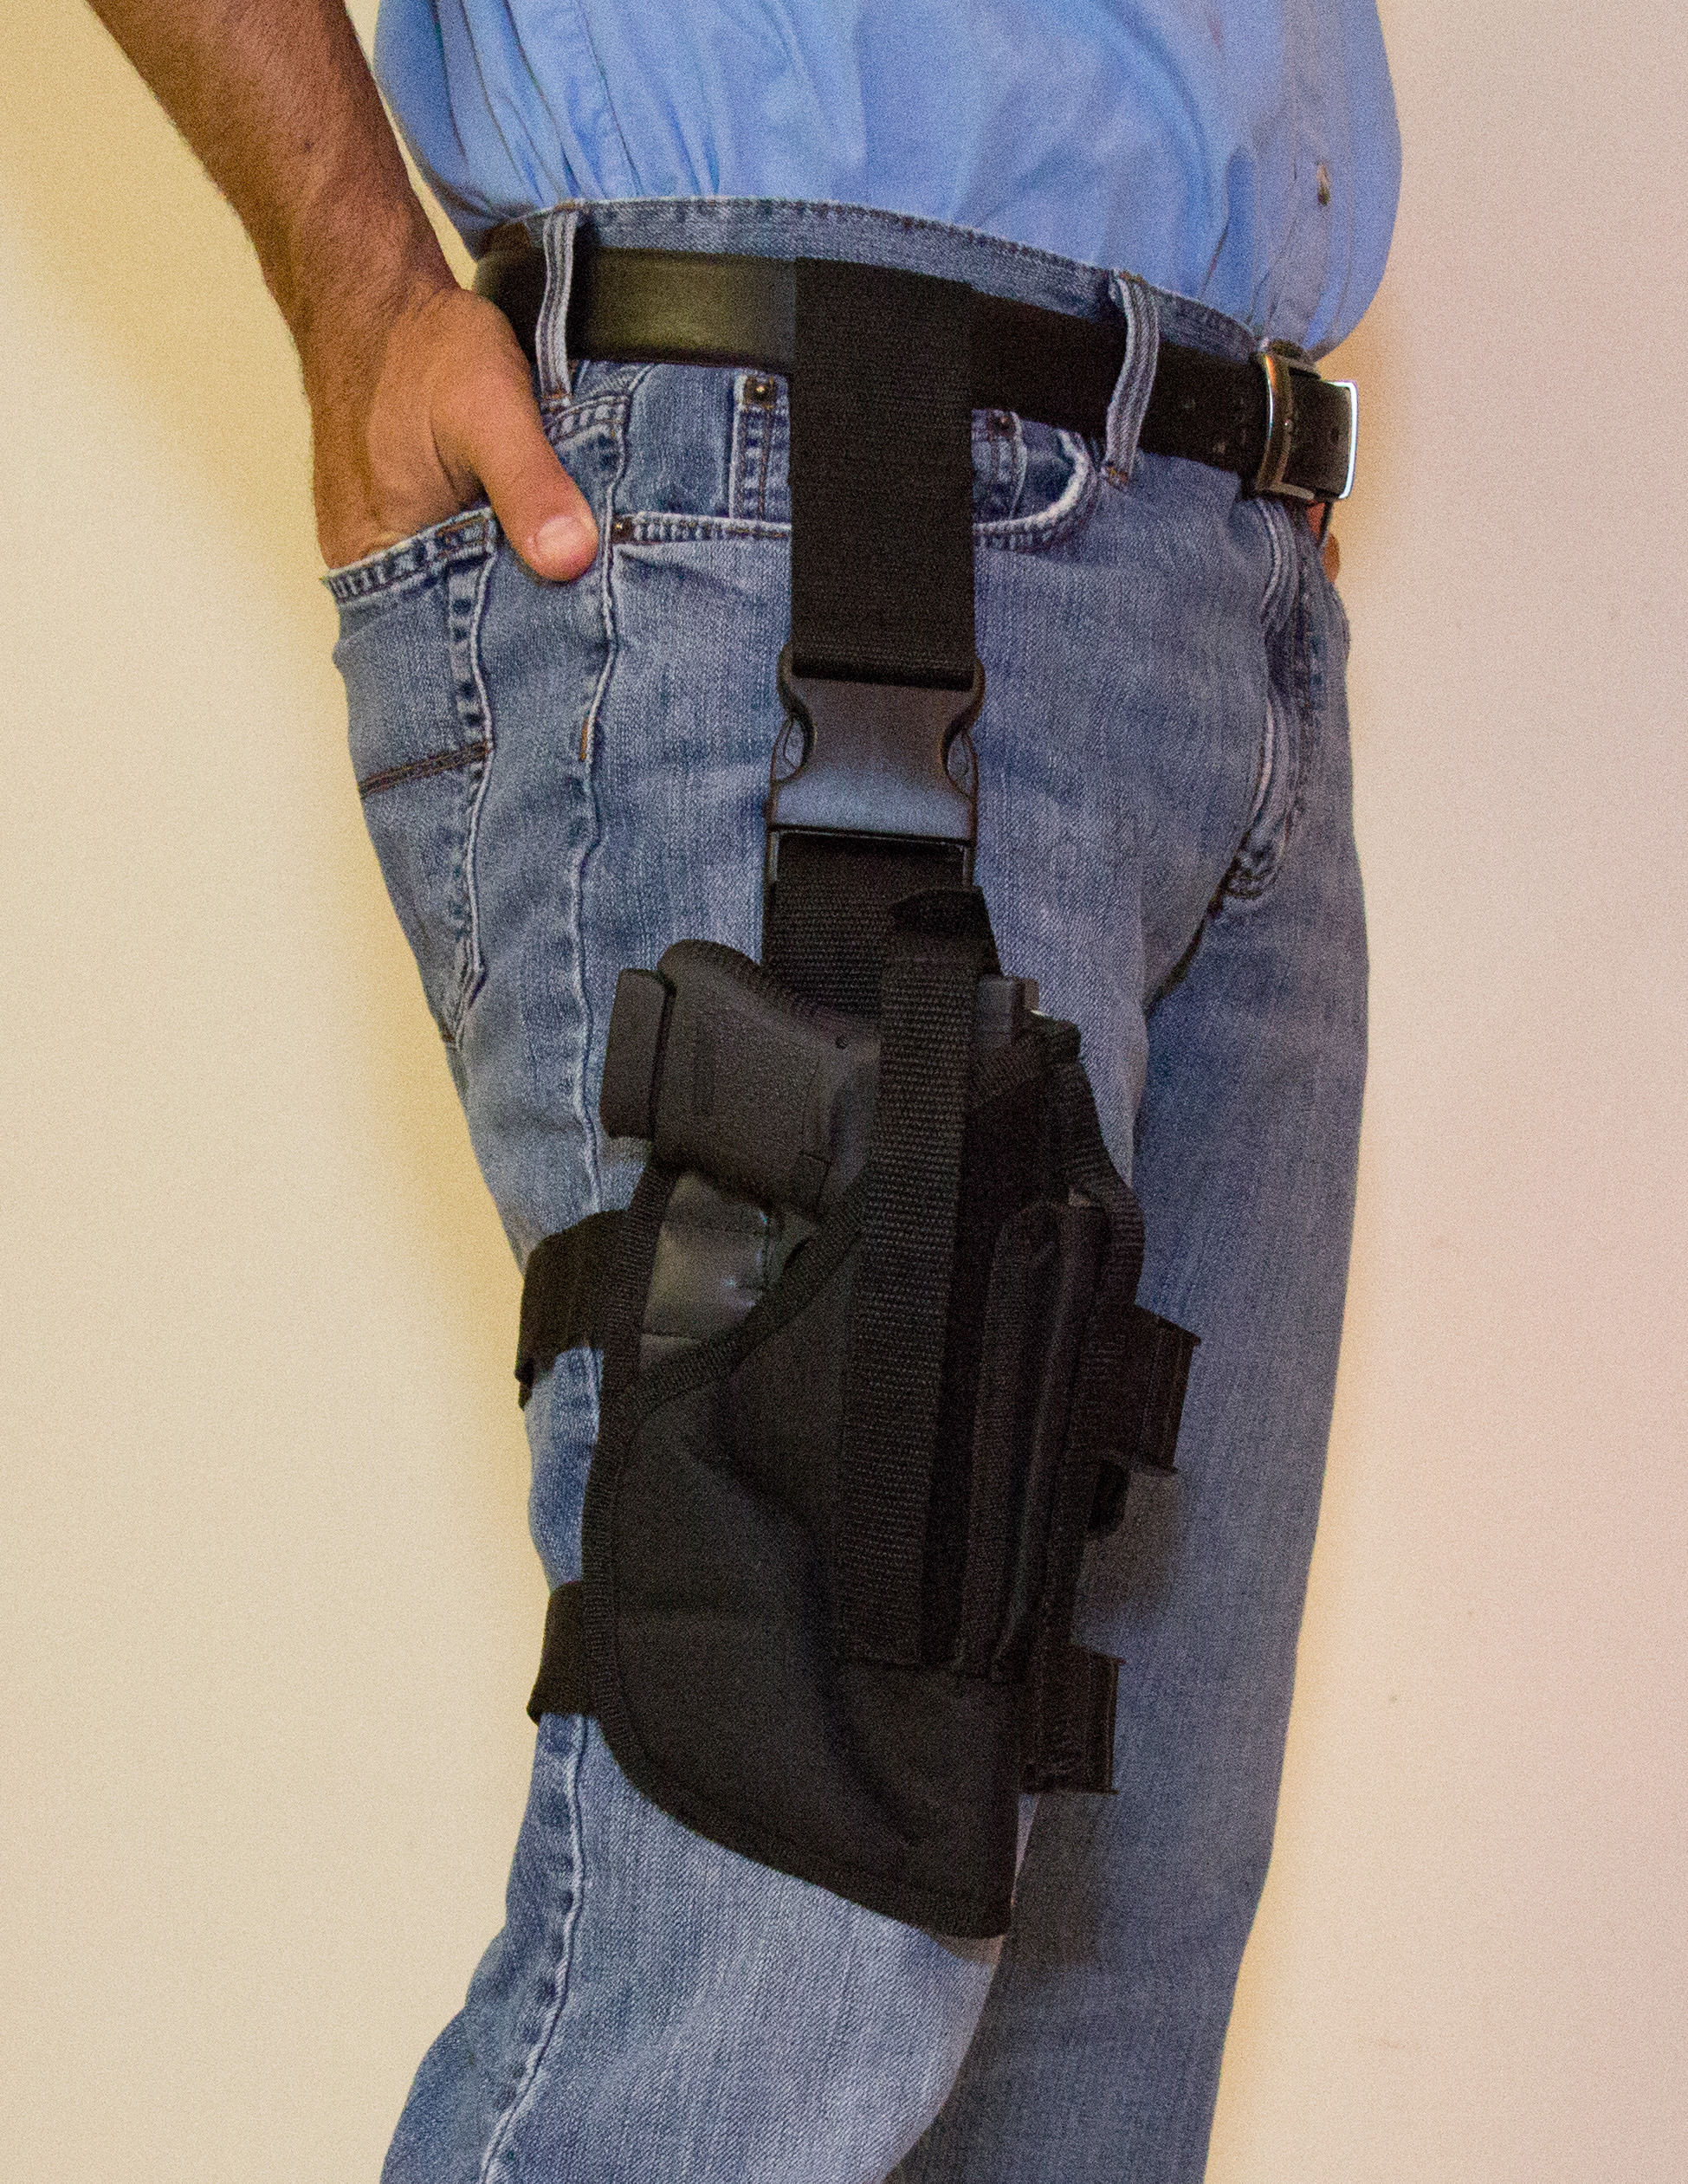 Holster Leg Tactical Holsters.